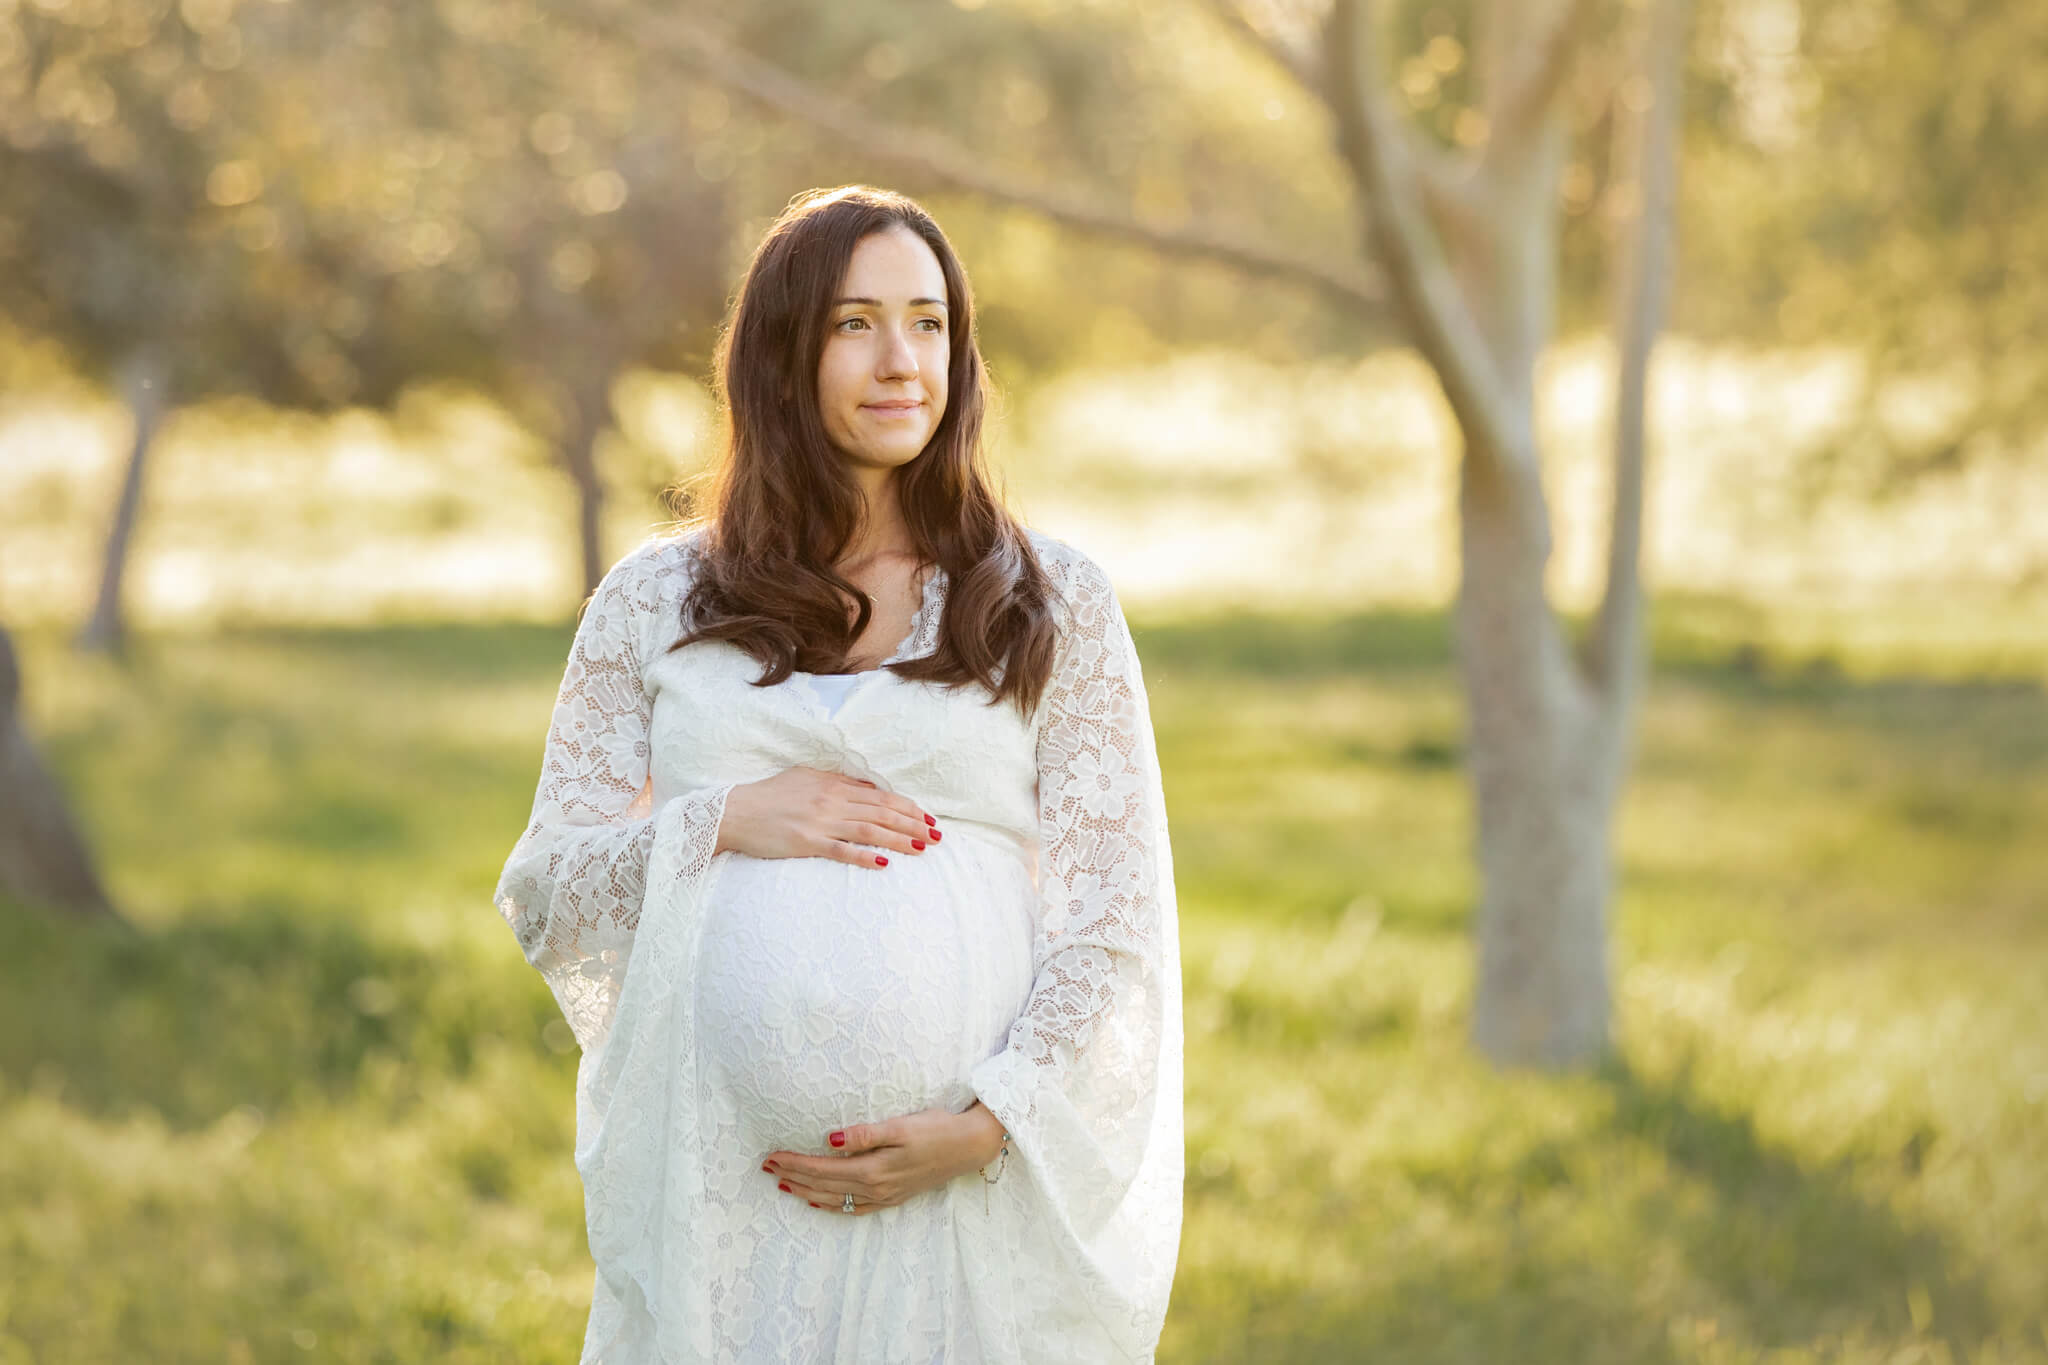 Mom to be holding her baby bump and wearing a white lace dress looking into the distance - Hatch Brentwood